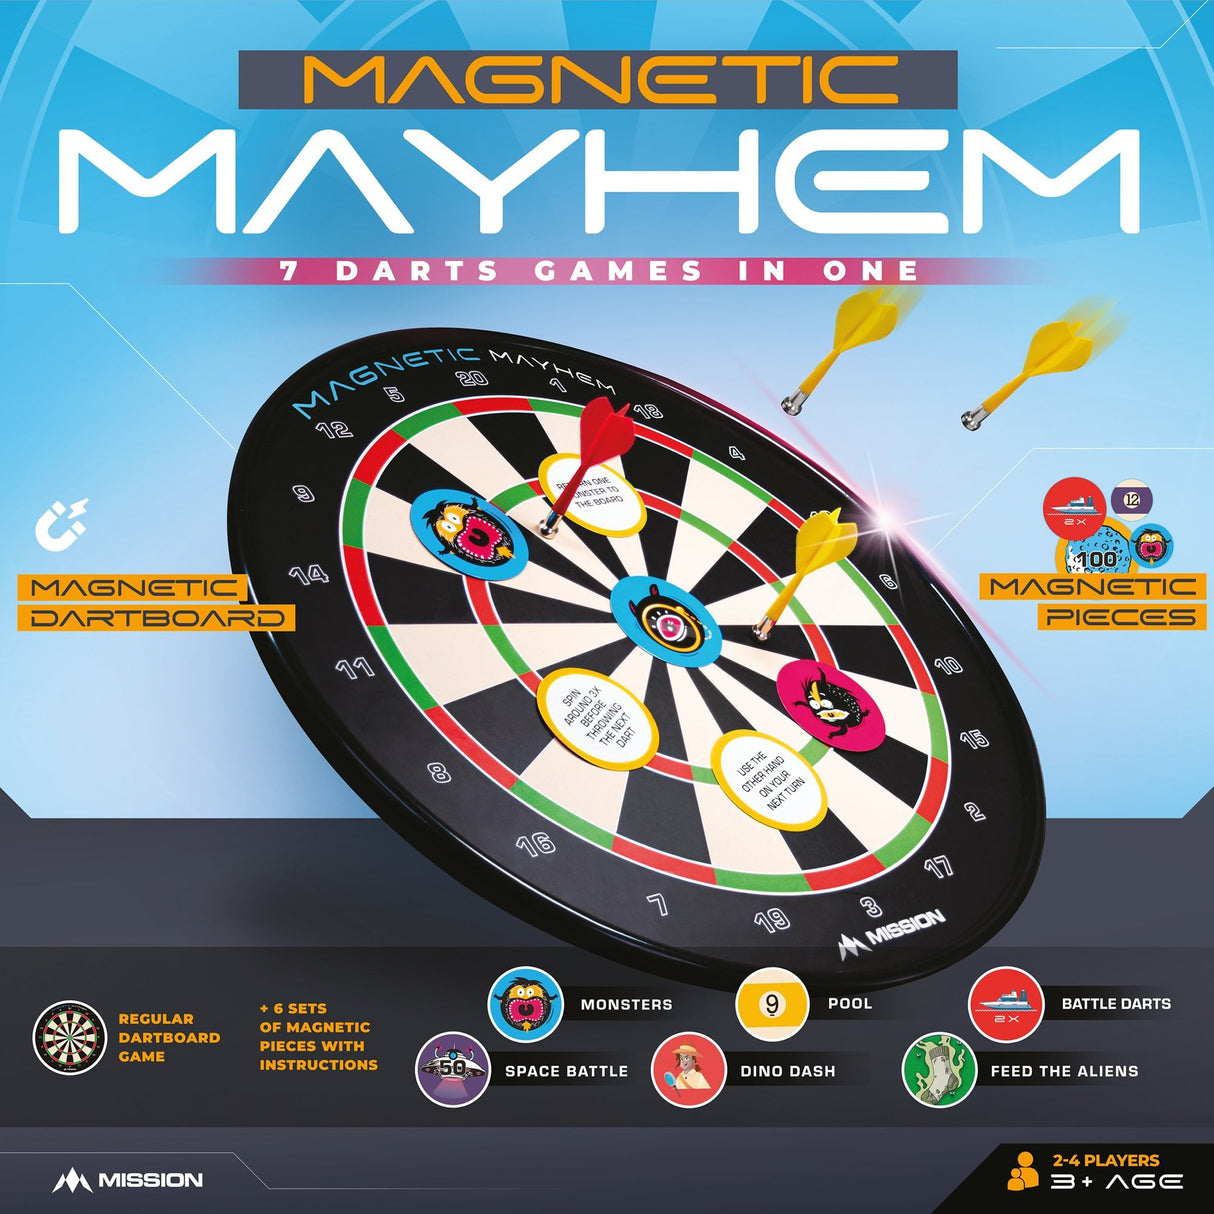 *Mission Magnetic Mayhem - Fun Darts Game - 7 Games in One - with 12 Magnetic Darts